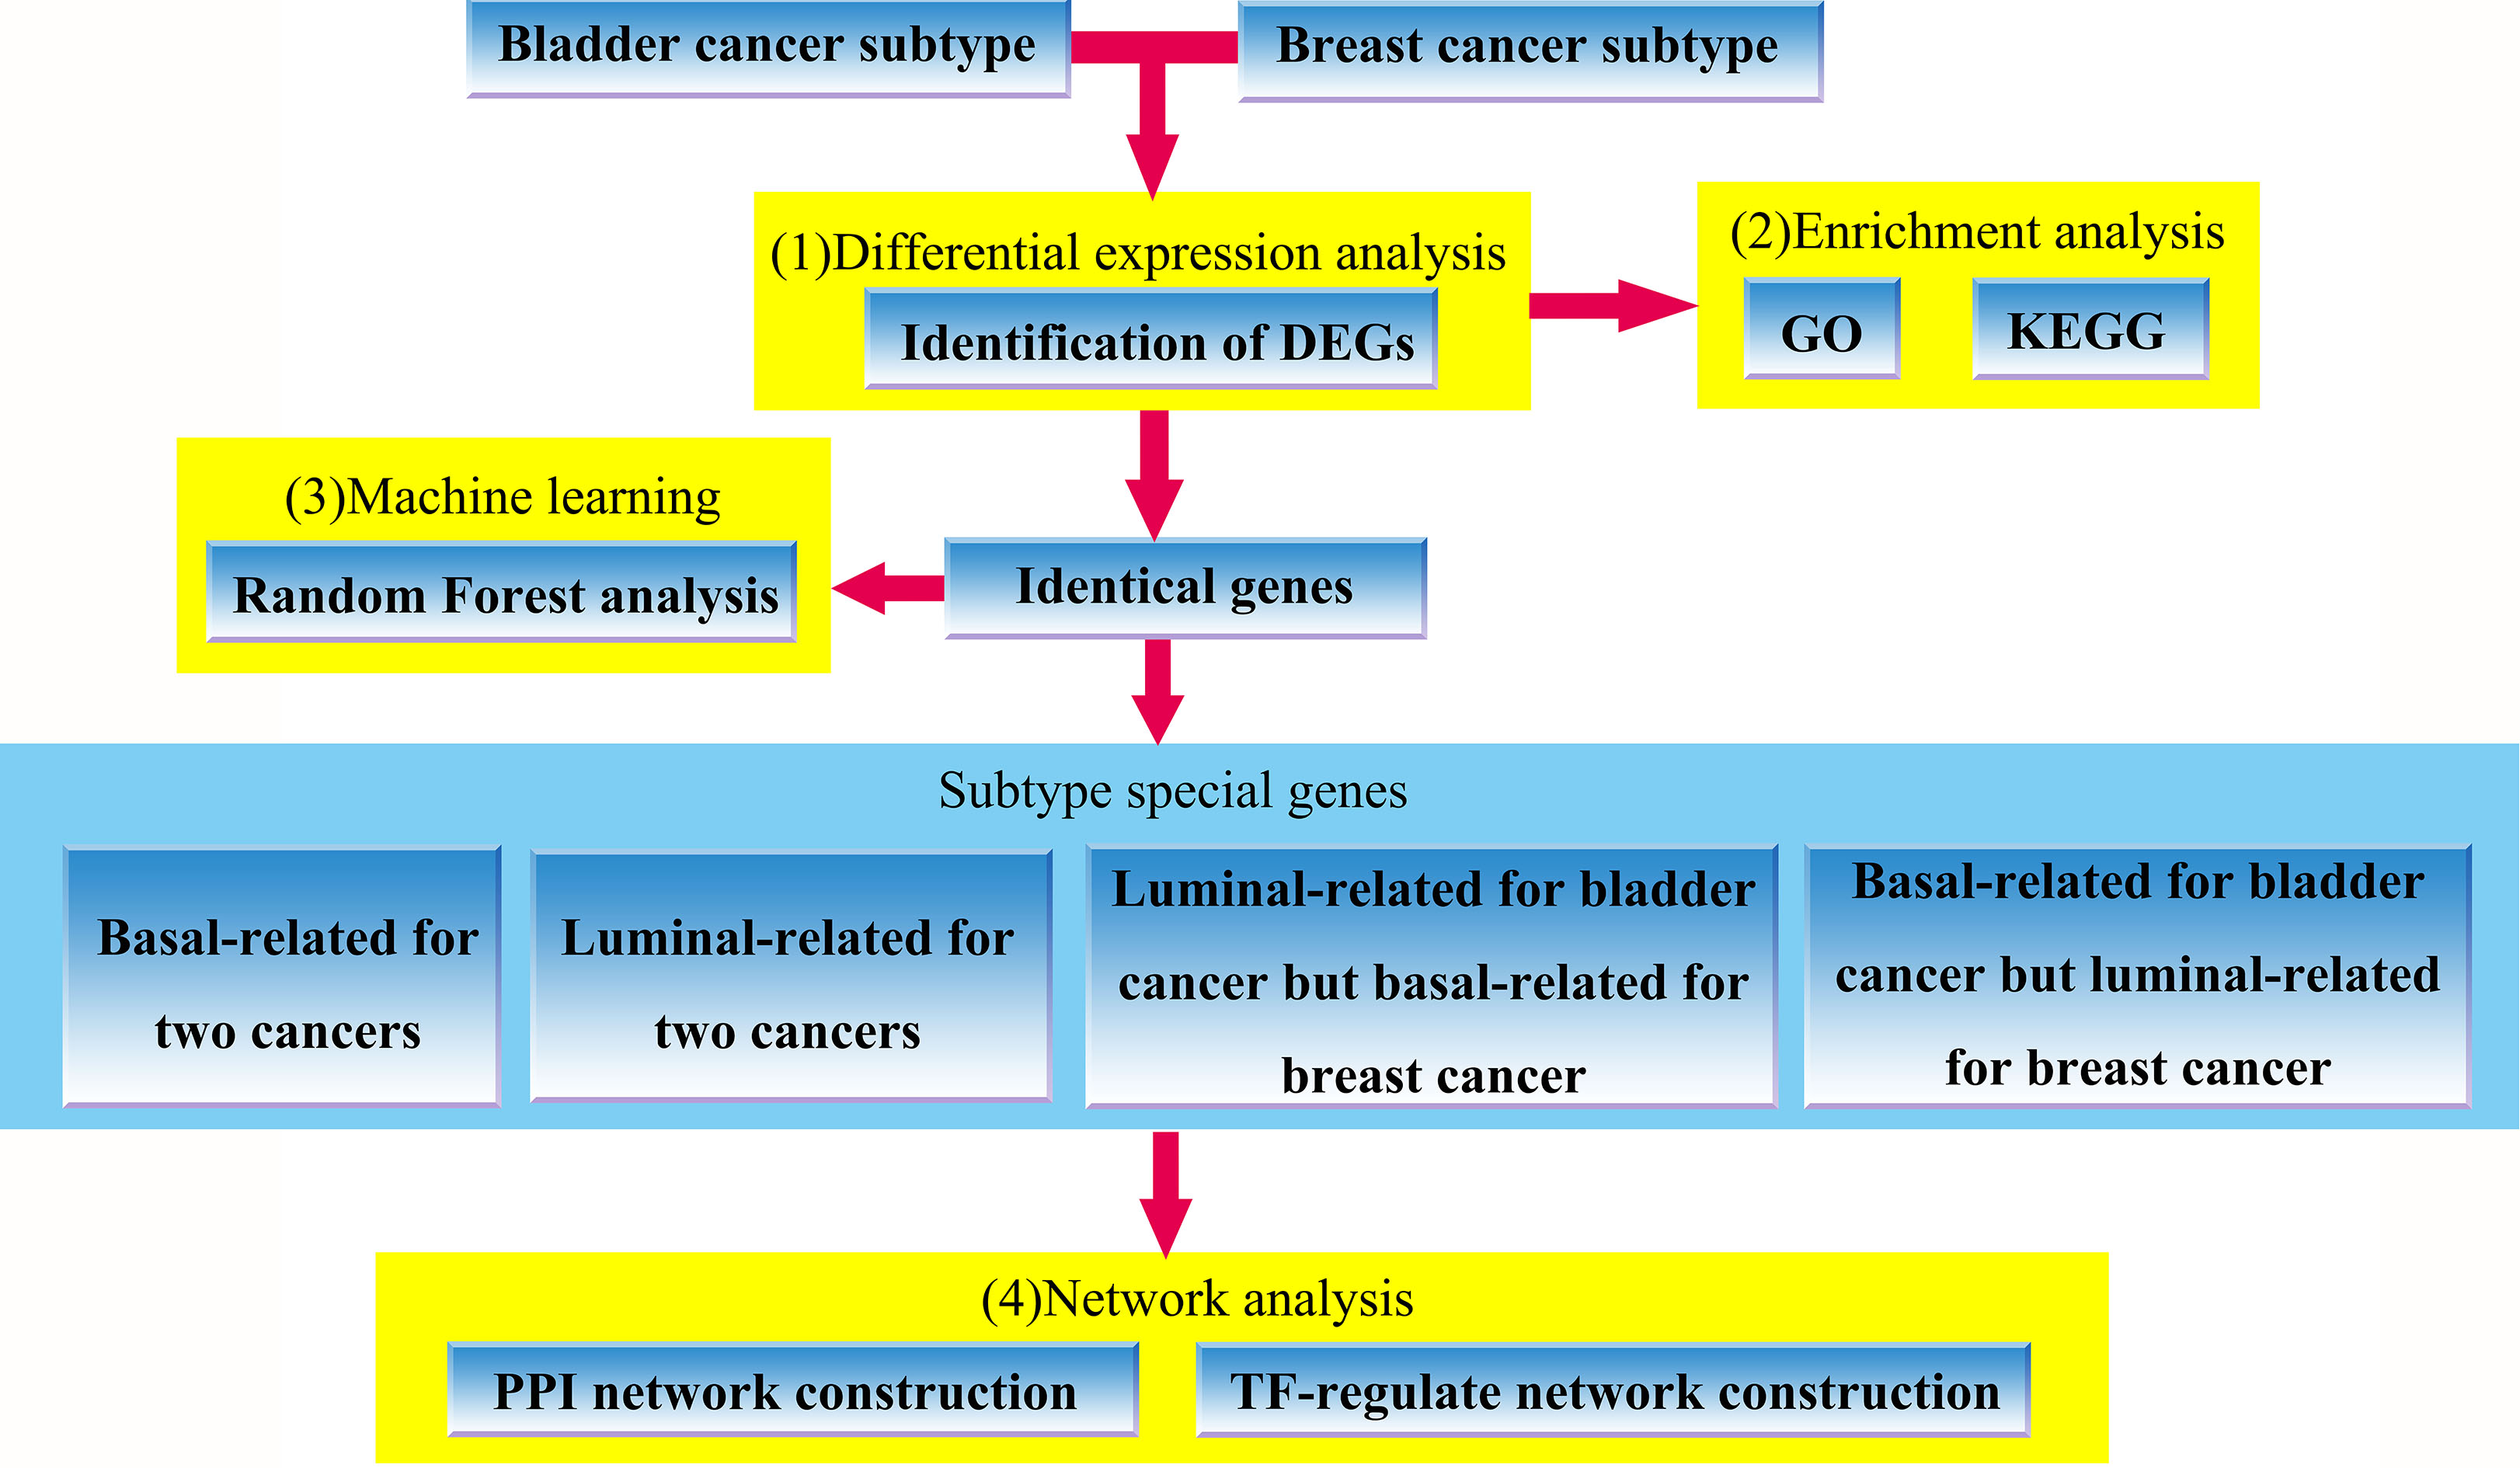 The flowchart of our work, which includes (1) identification of bladder cancer and breast cancer subtypes-related DEGs, (2) GO and KEGG enrichment analysis for the identified DEGs, (3) random forest analysis using overlapping genes shared by two cancers (4) PPI network and TF-regulation network construction based on subtype special genes involved in the defined four groups.